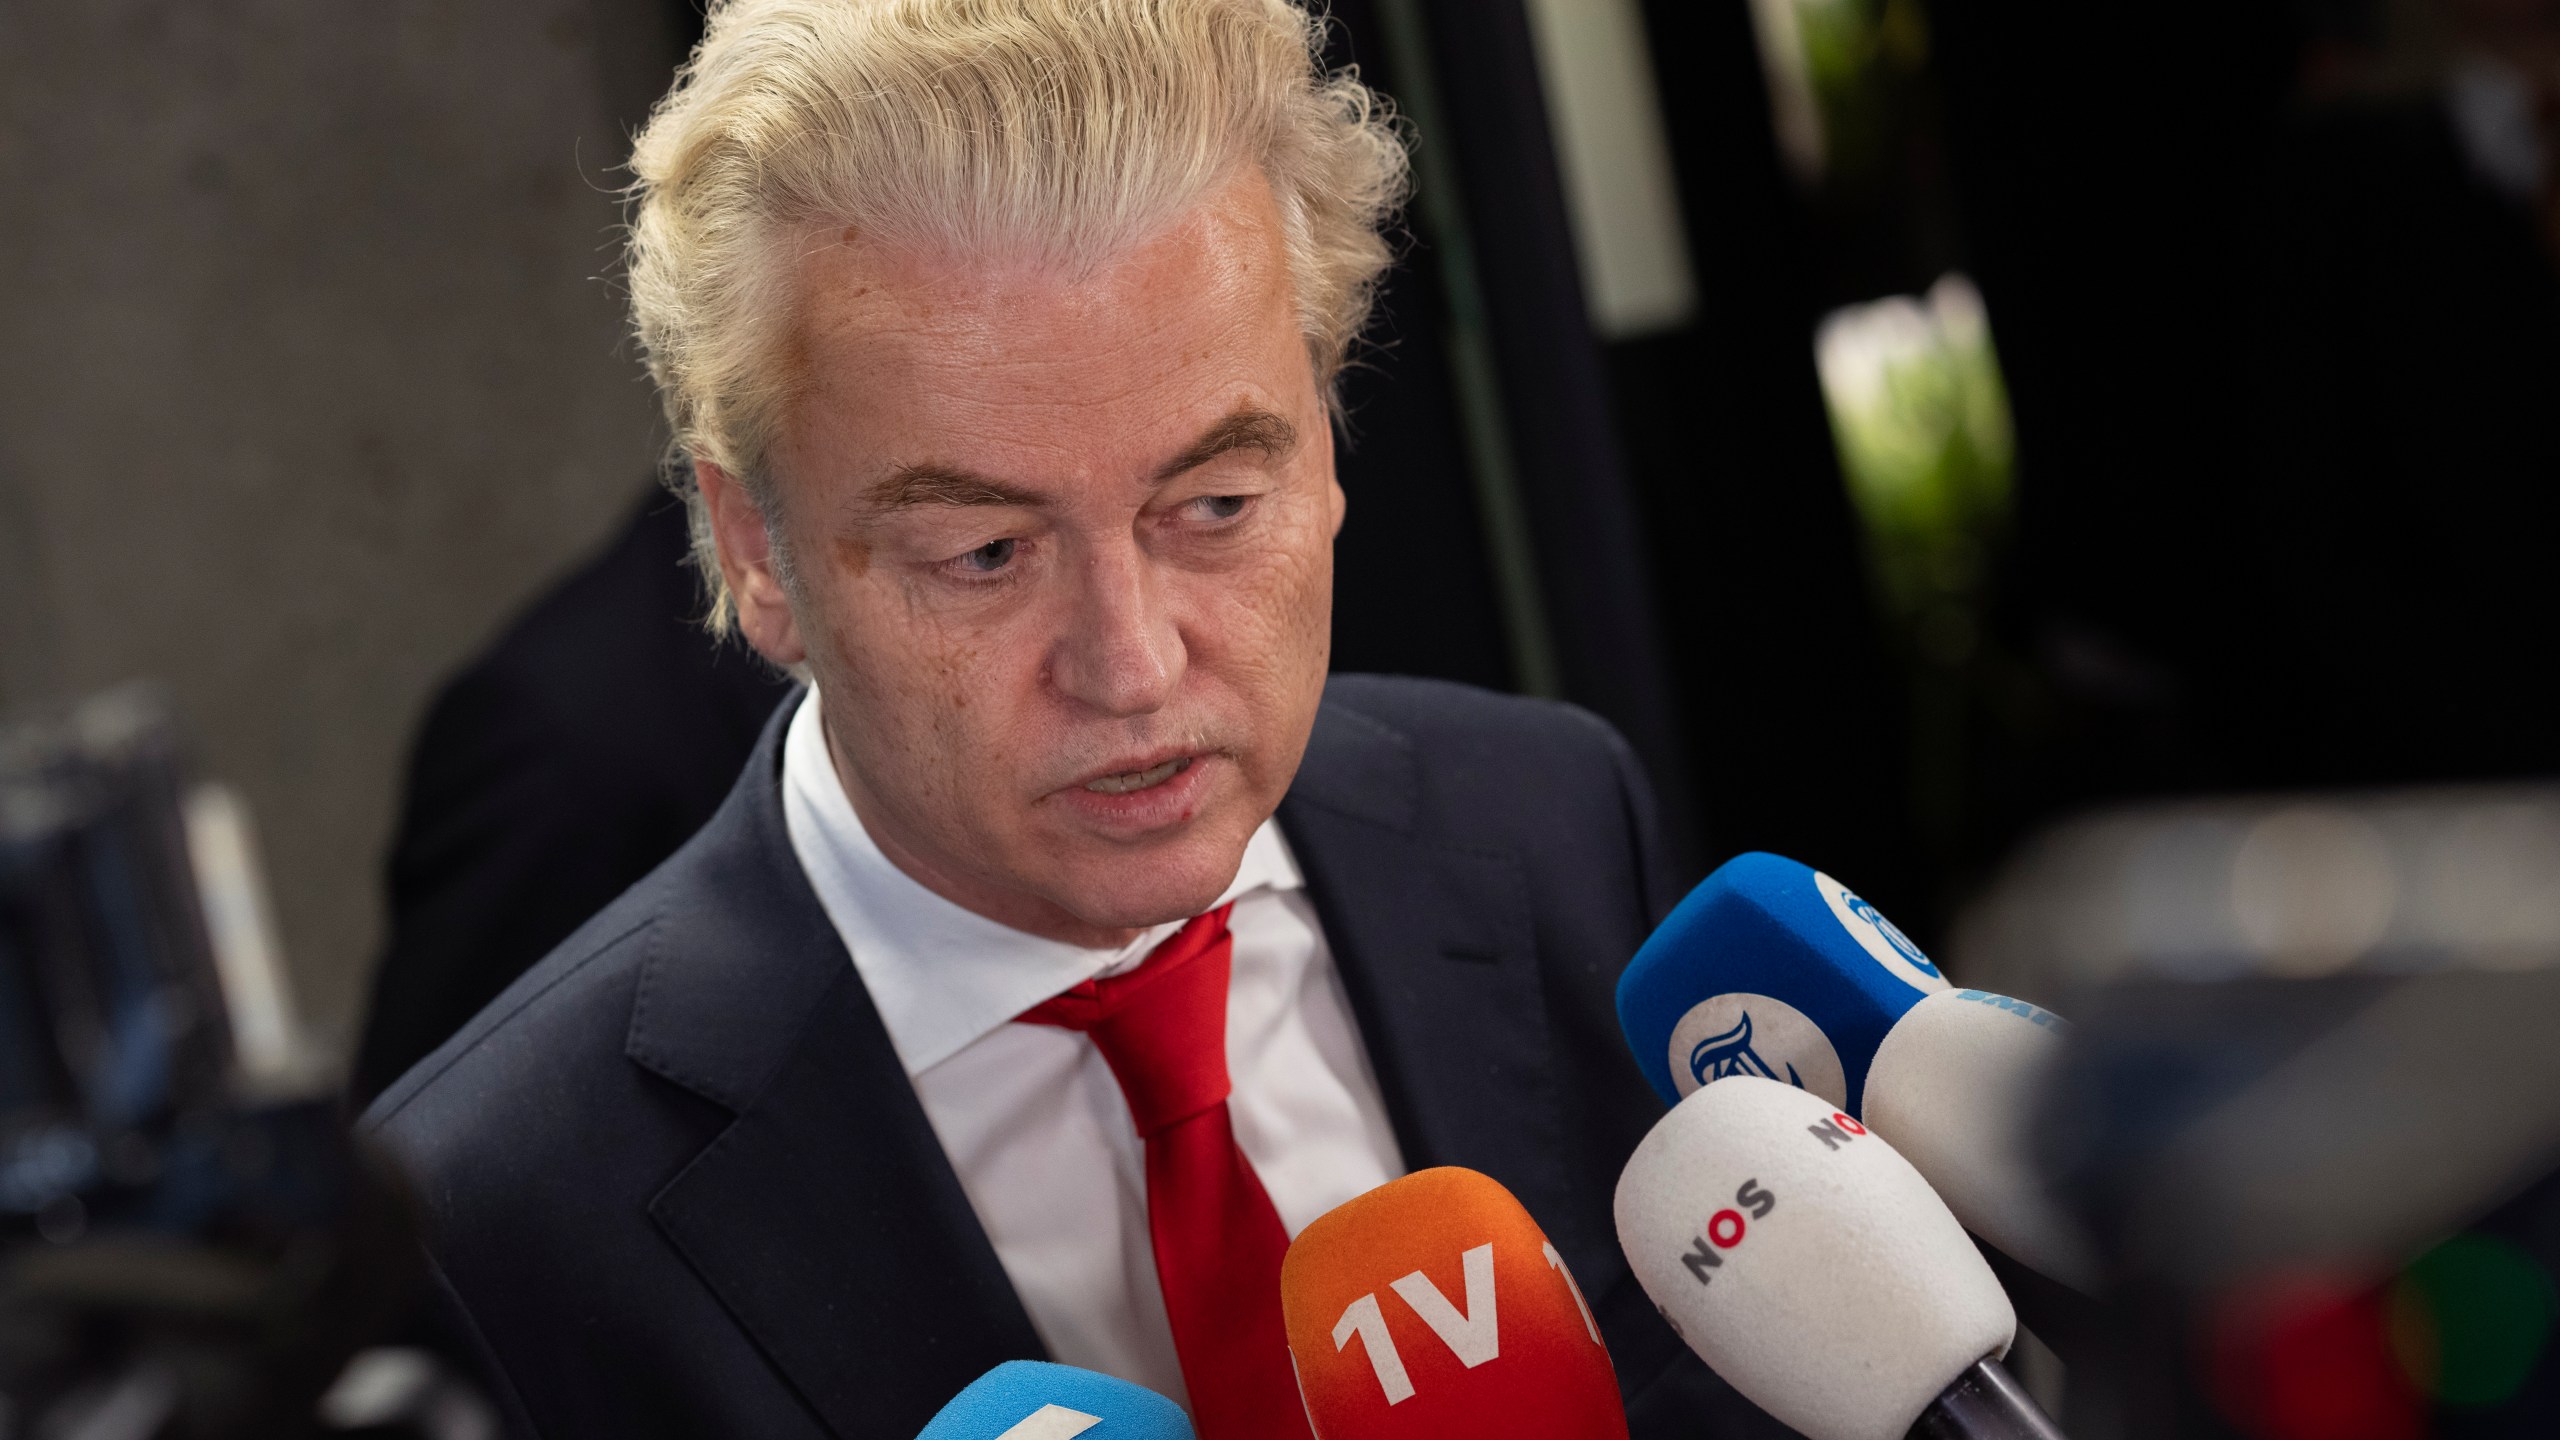 FILE - Geert Wilders, leader of the far-right party PVV, or Party for Freedom, talks to the media after a meeting with speaker of the House Vera Bergkamp, two days after Wilders won the most votes in a general election, in The Hague, Netherlands, on Nov. 24, 2023. Two days of behind-closed doors talks between four Dutch political leaders appear to have forced a breakthrough in negotiations to form a new ruling coalition nearly four months after a general election won by Wilders. While the exact contours of a new coalition Cabinet remain unclear, Kim Putters, who led the talks, believes that the parties are now ready to hammer out a deal. Putters was writing up a report Wednesday March 13, 2024 that he will present to lawmakers on Thursday. (AP Photo/Peter Dejong, File)